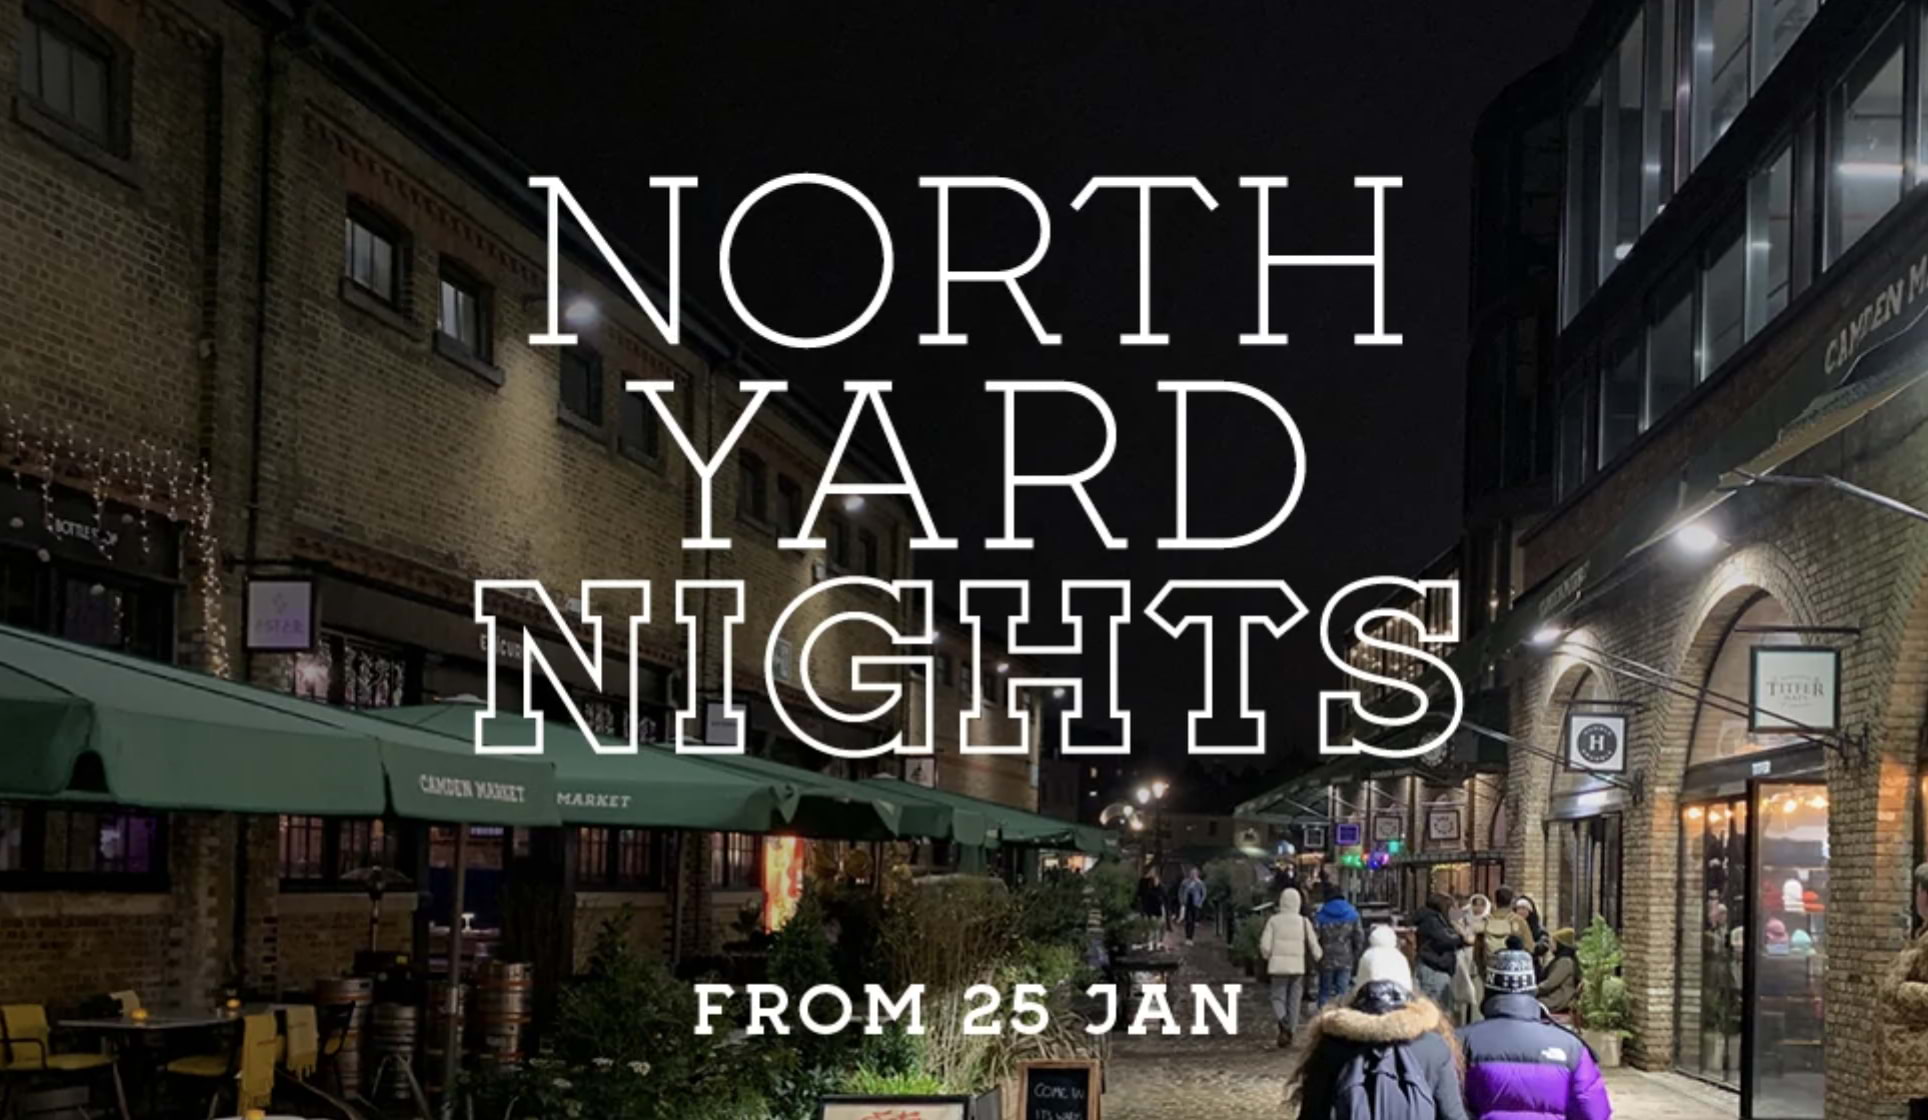 The ultimate foodie fest: North Yard Nights at Camden Market